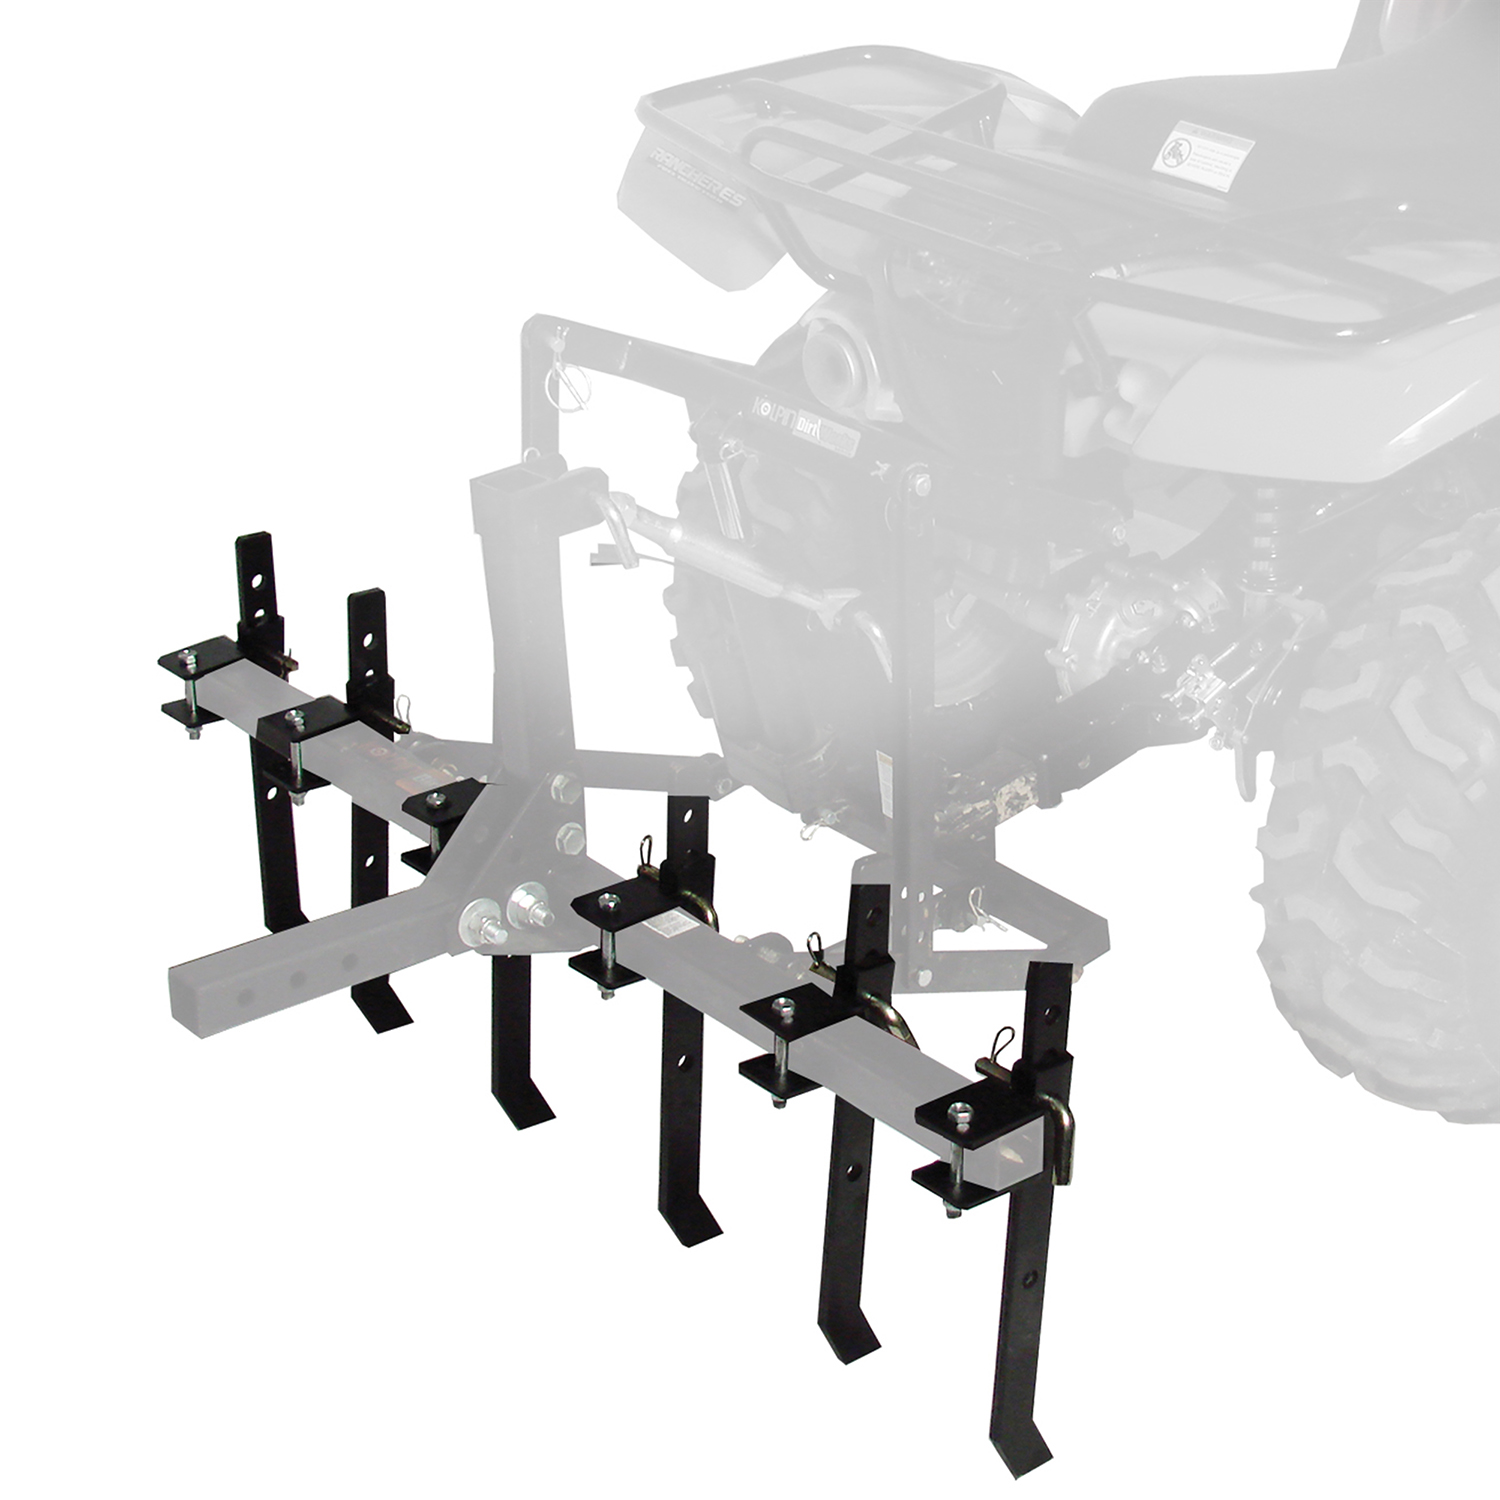 Digger Ice Fishing ATV Rear Tow Hitch for sale online